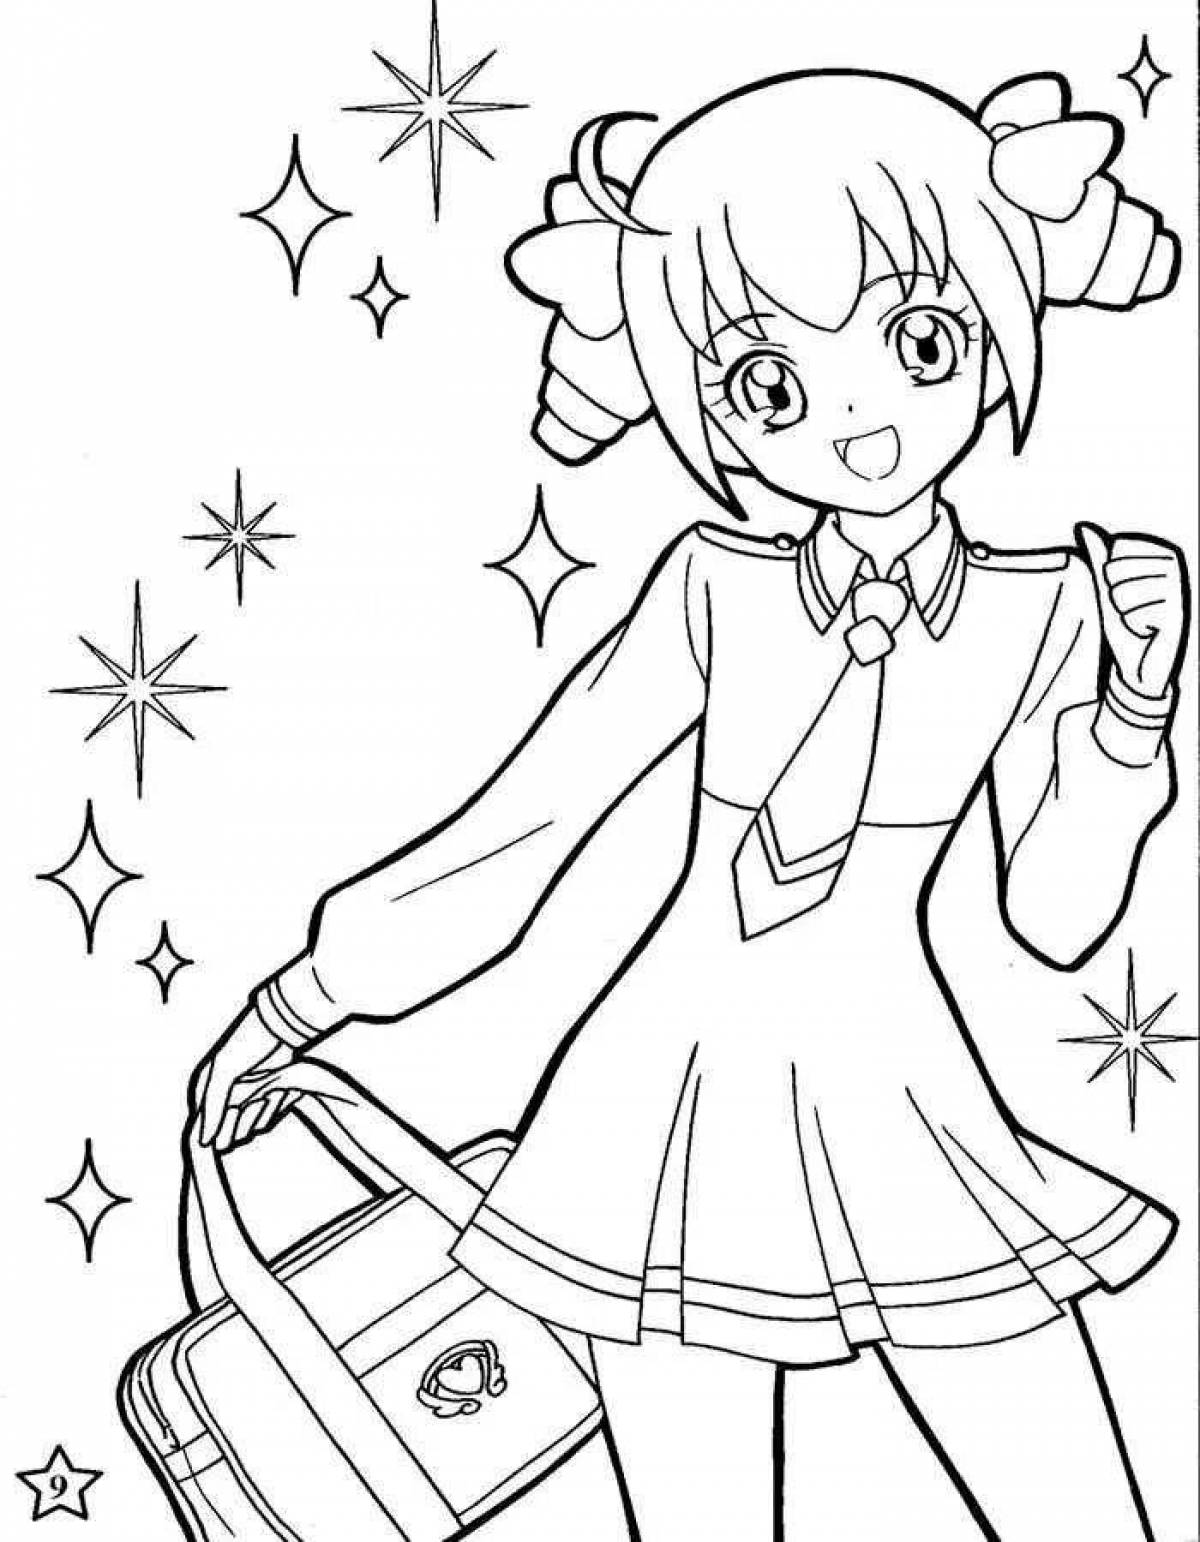 Blooming anime coloring page